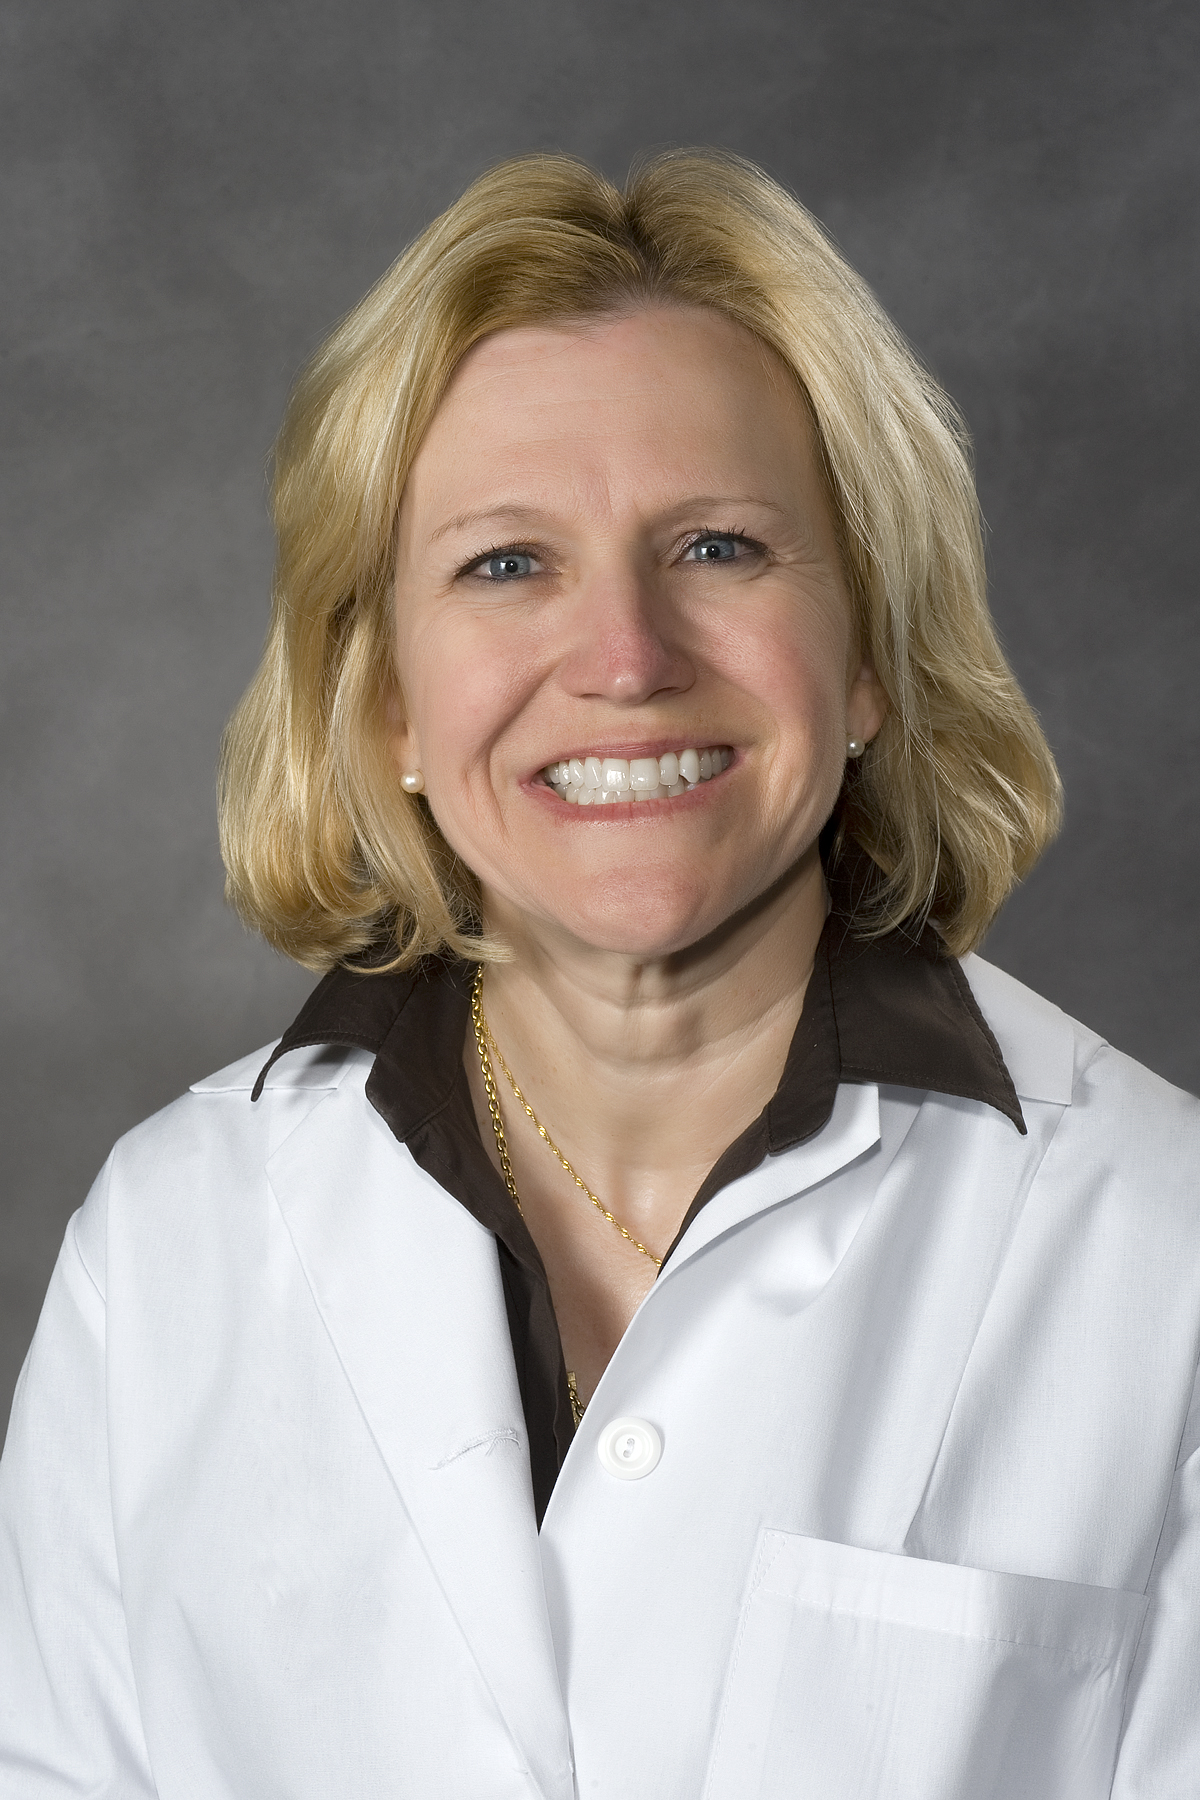 Robin L. Foster, M.D., MCV Physicians Distinguished Clinician Award